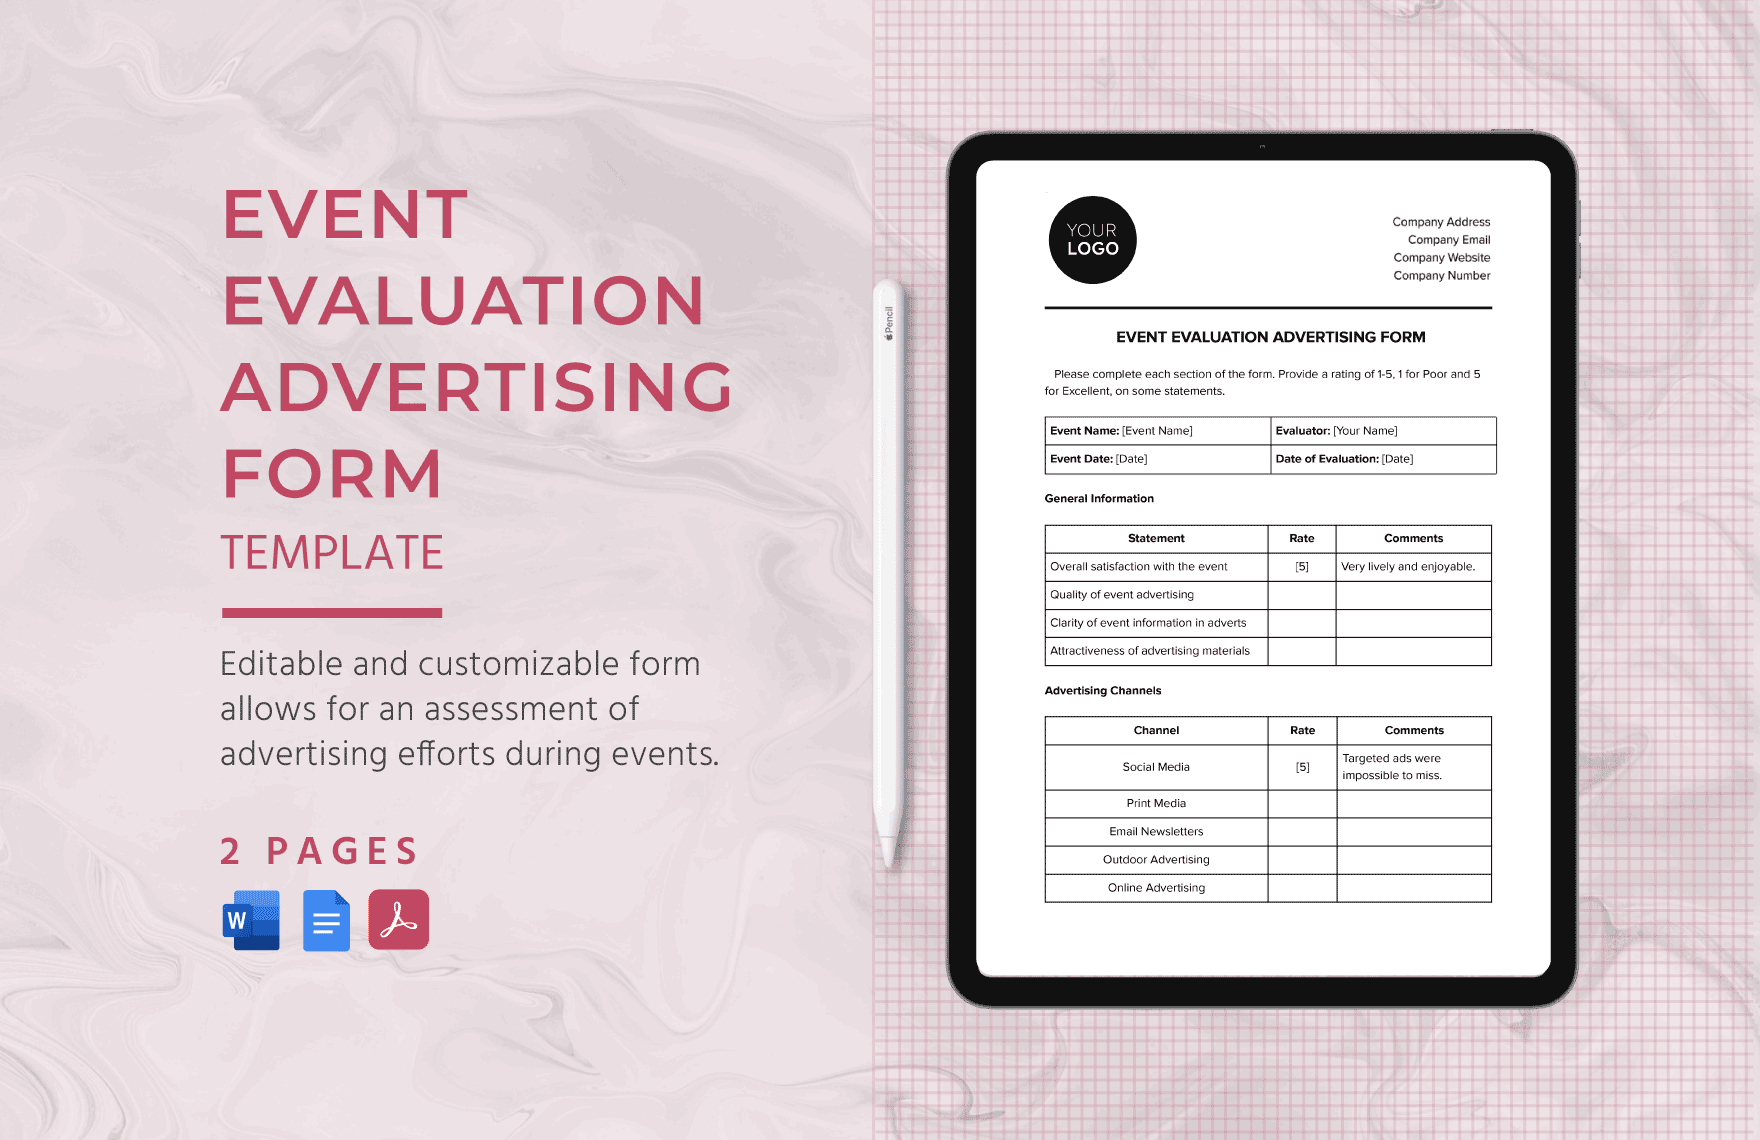 Event Evaluation Advertising Form Template in Word, Google Docs, PDF